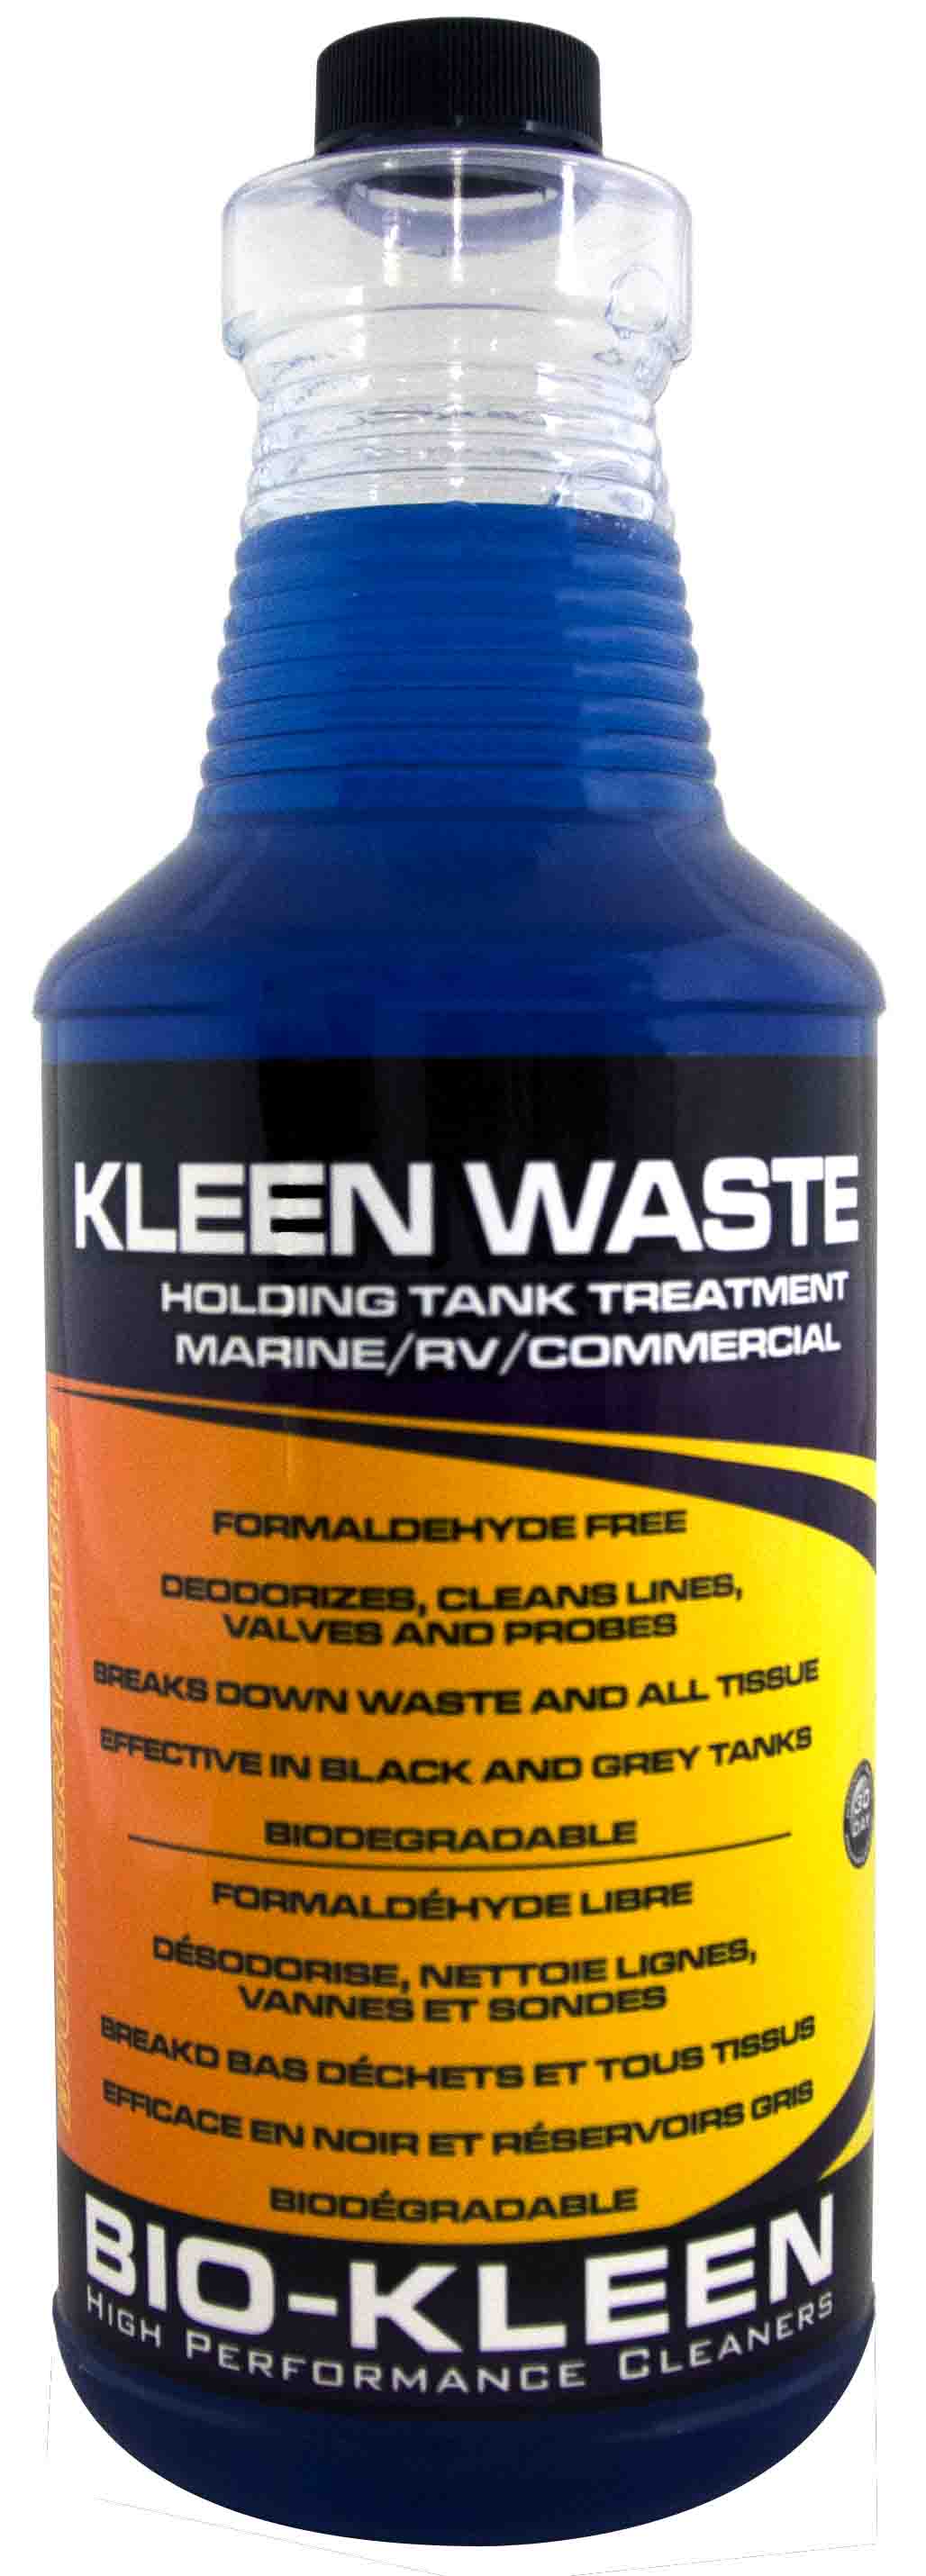 Bio-Kleen Products Inc. M01707 RV Marine Kleen Waste Holding Tank Deodorizer And Waste Digester For